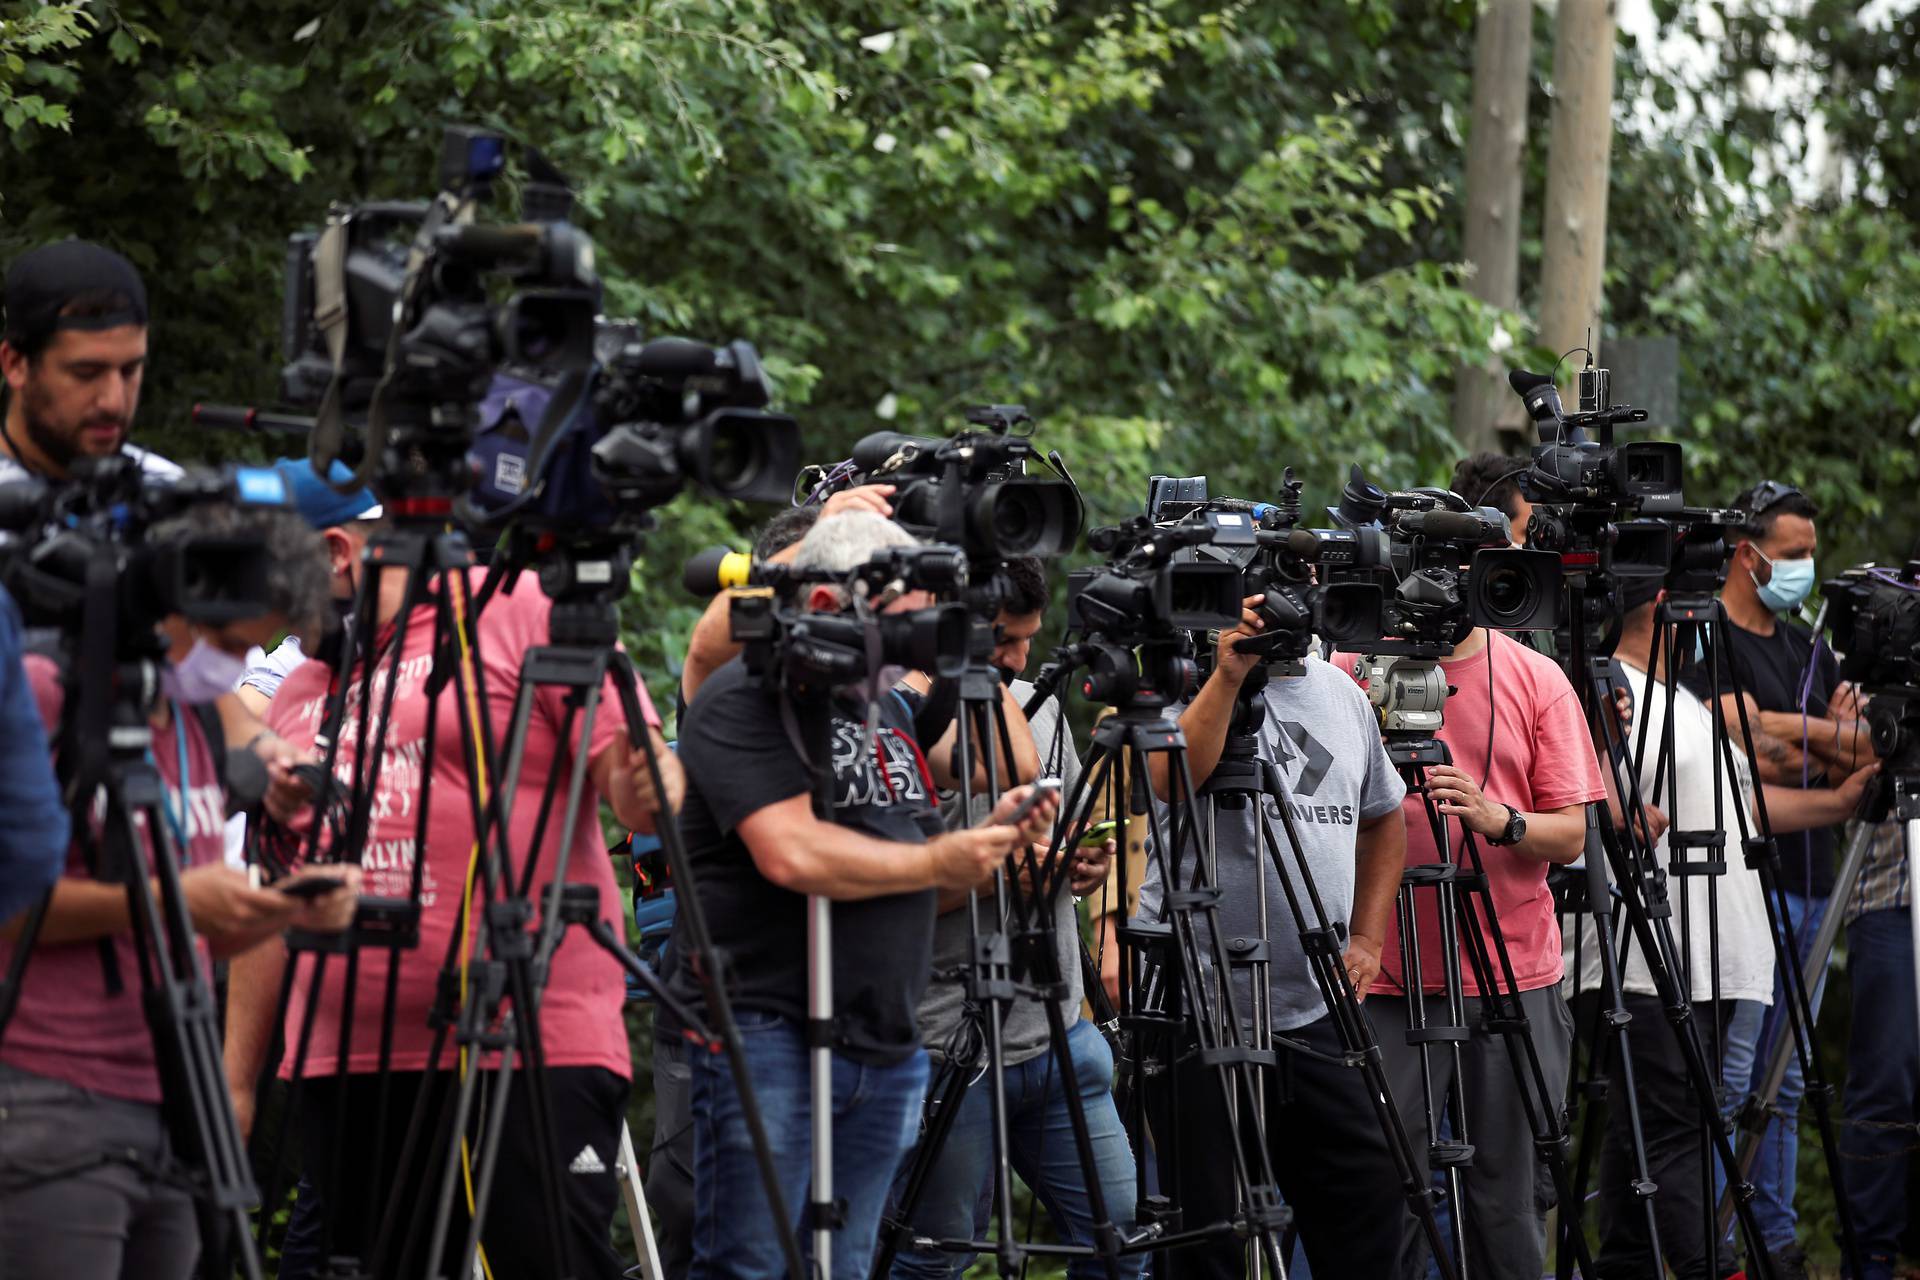 Members of the media stand outside the house where Diego Maradona was staying, in Tigre